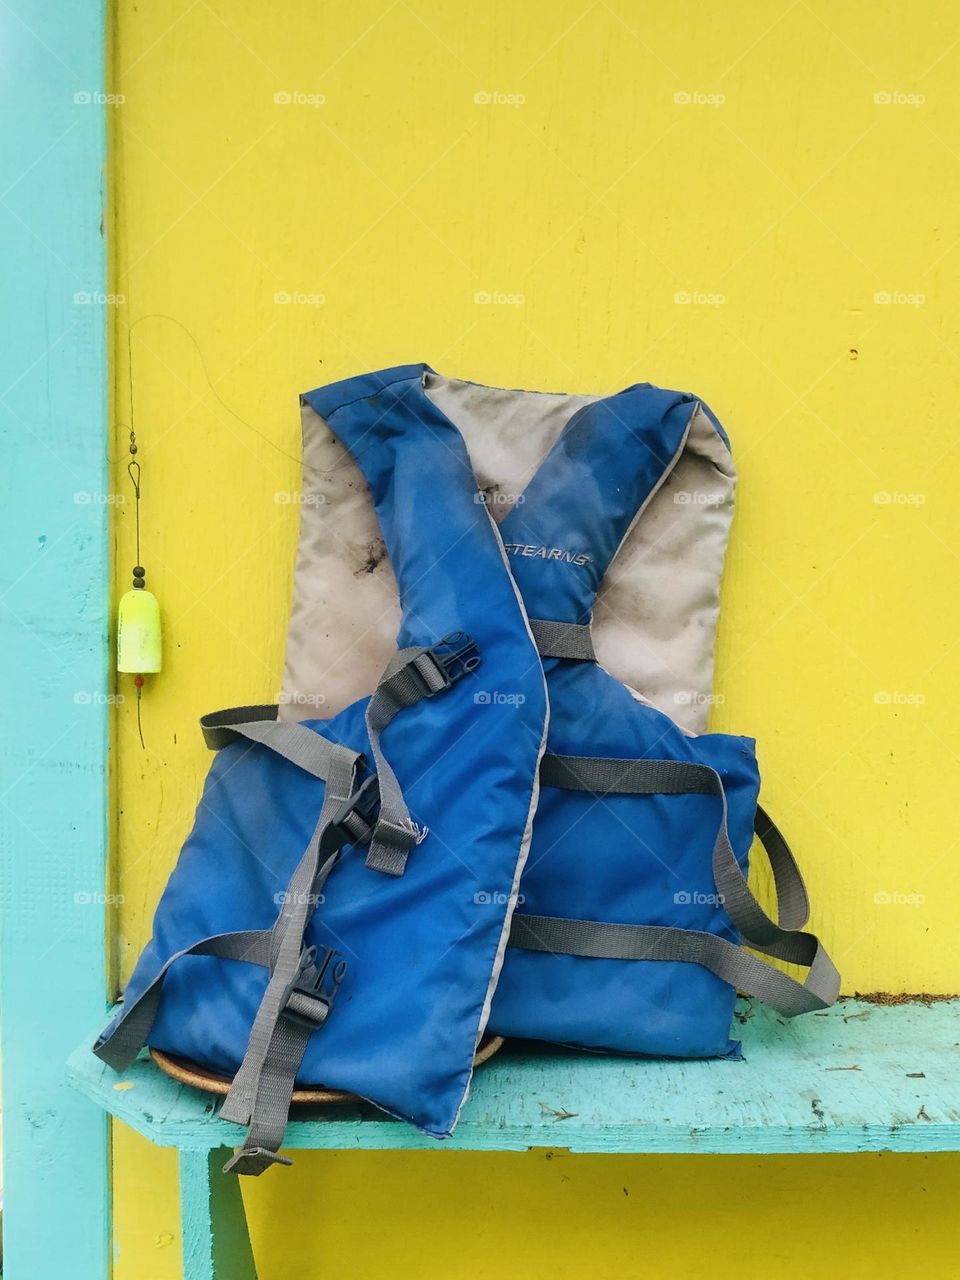 Still life of life preserver and fishing tackle against painted yellow shed. Equipment is ready for summer boating!